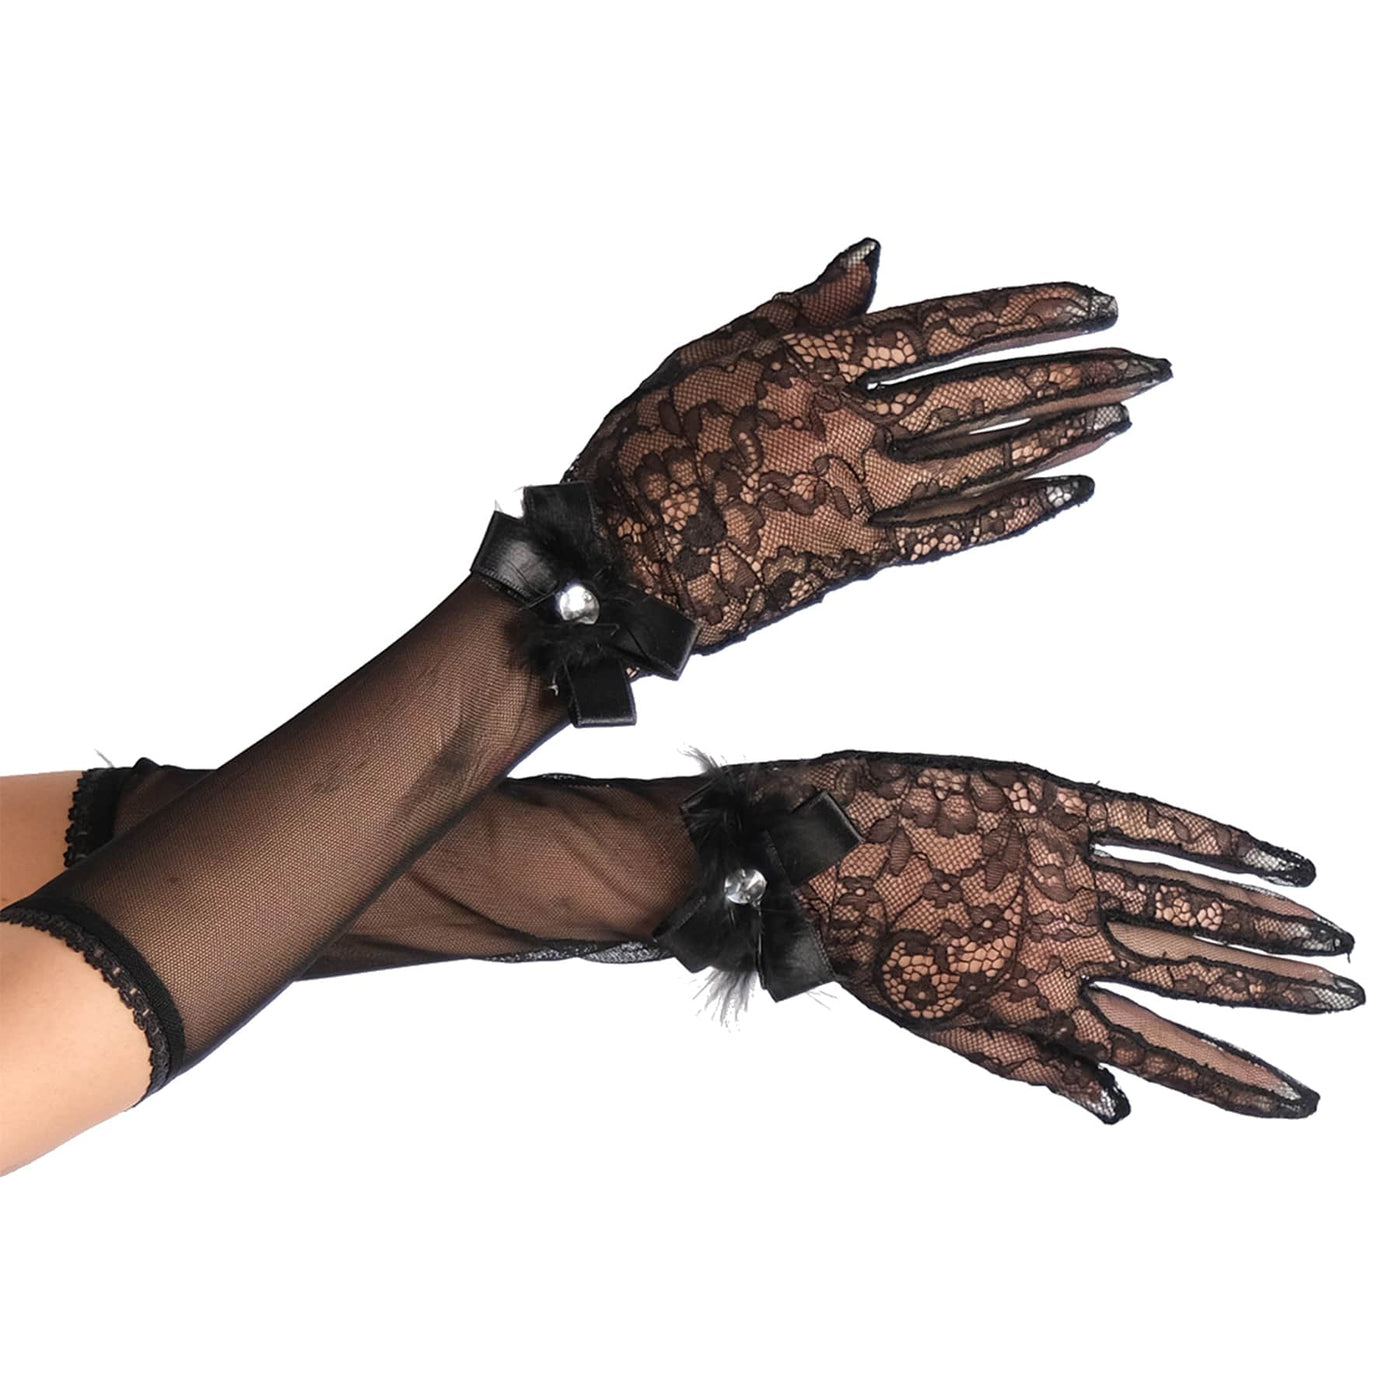 Feathered Ribbon Lace Bridal Gloves Long Model Tulle Gloves for Henna Night Gloves for Women